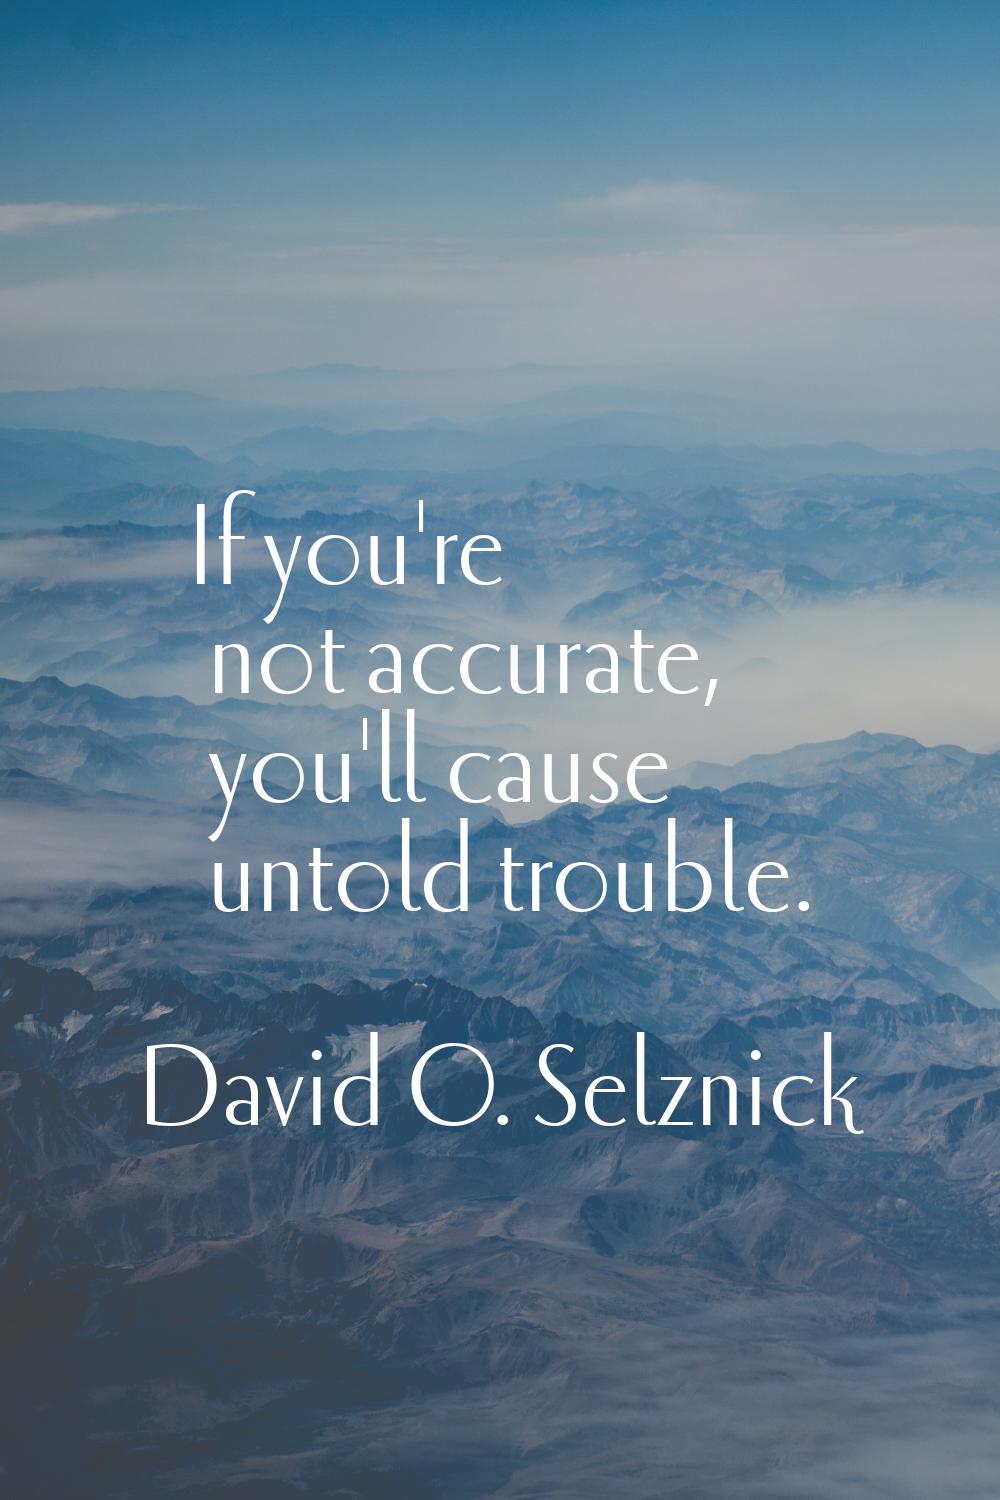 If you're not accurate, you'll cause untold trouble.